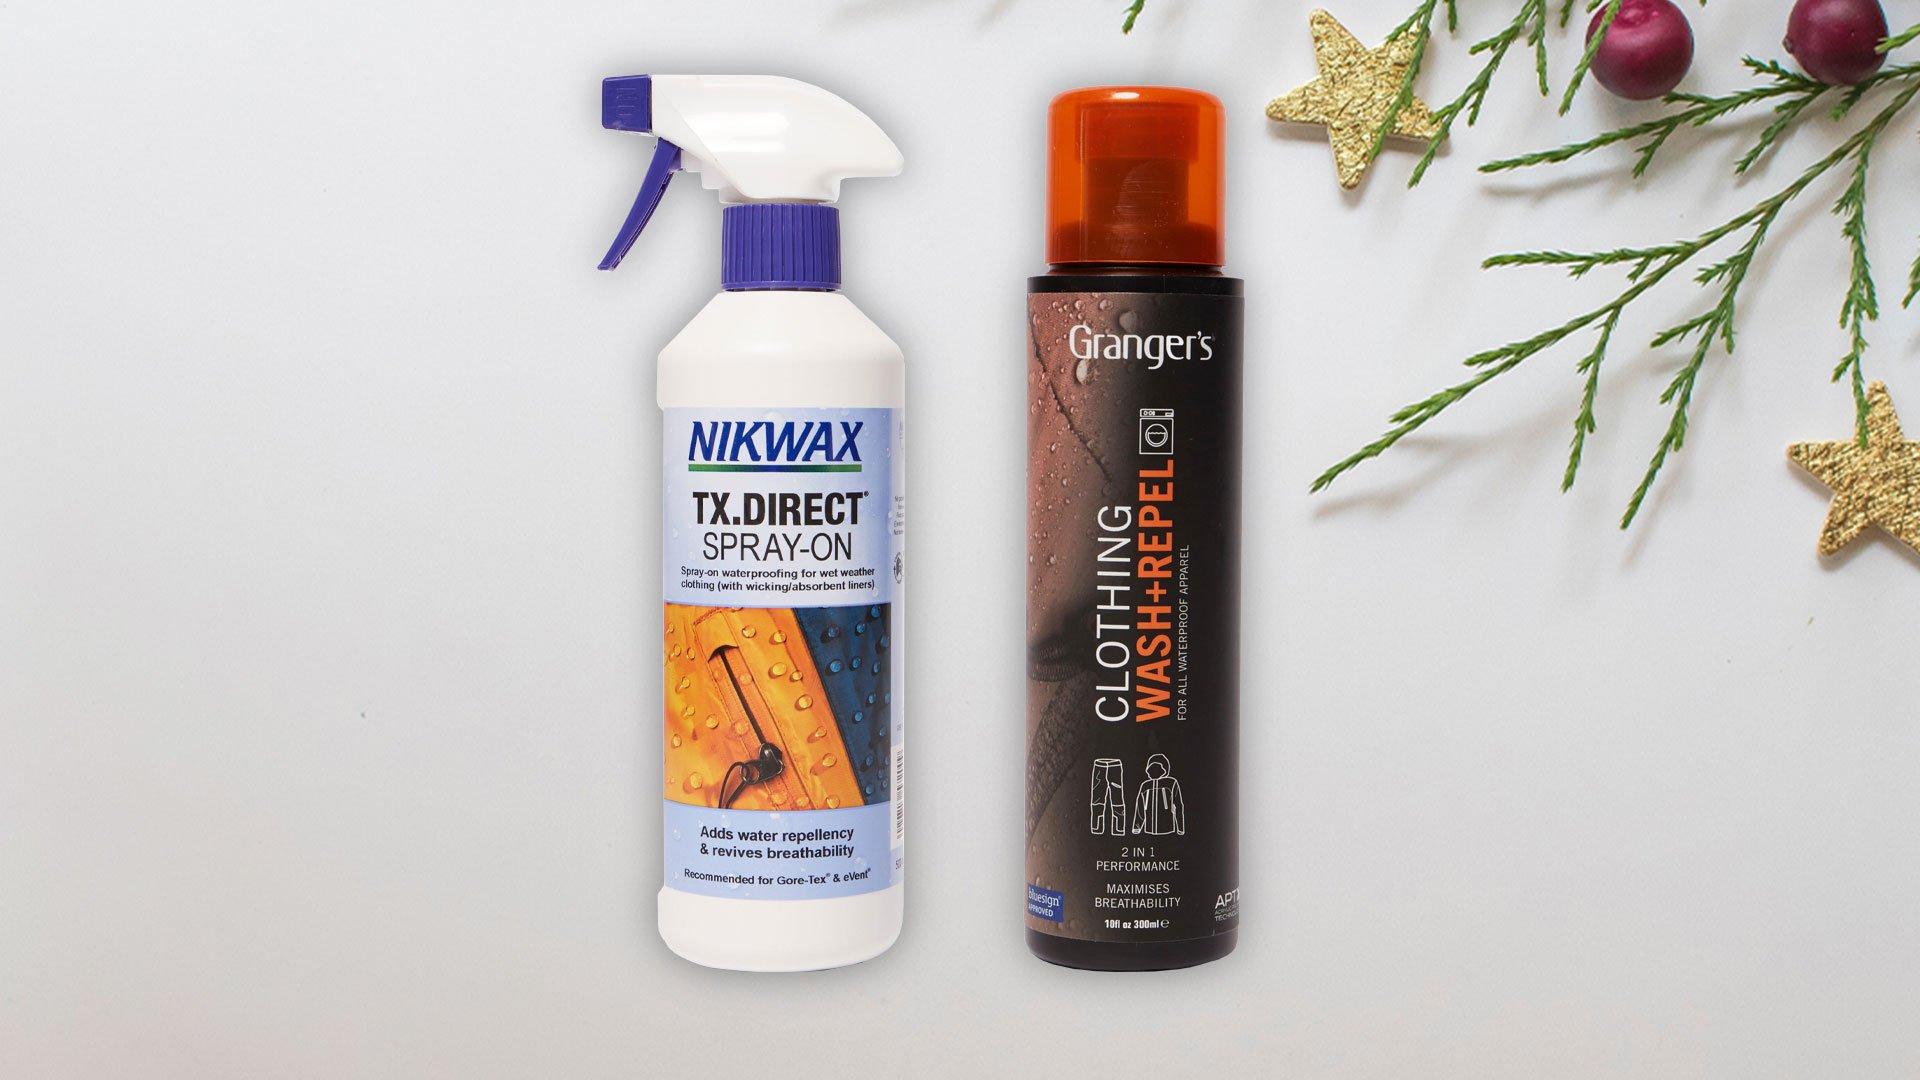 Outdoor Gear Care Products from Nikwax and Grangers